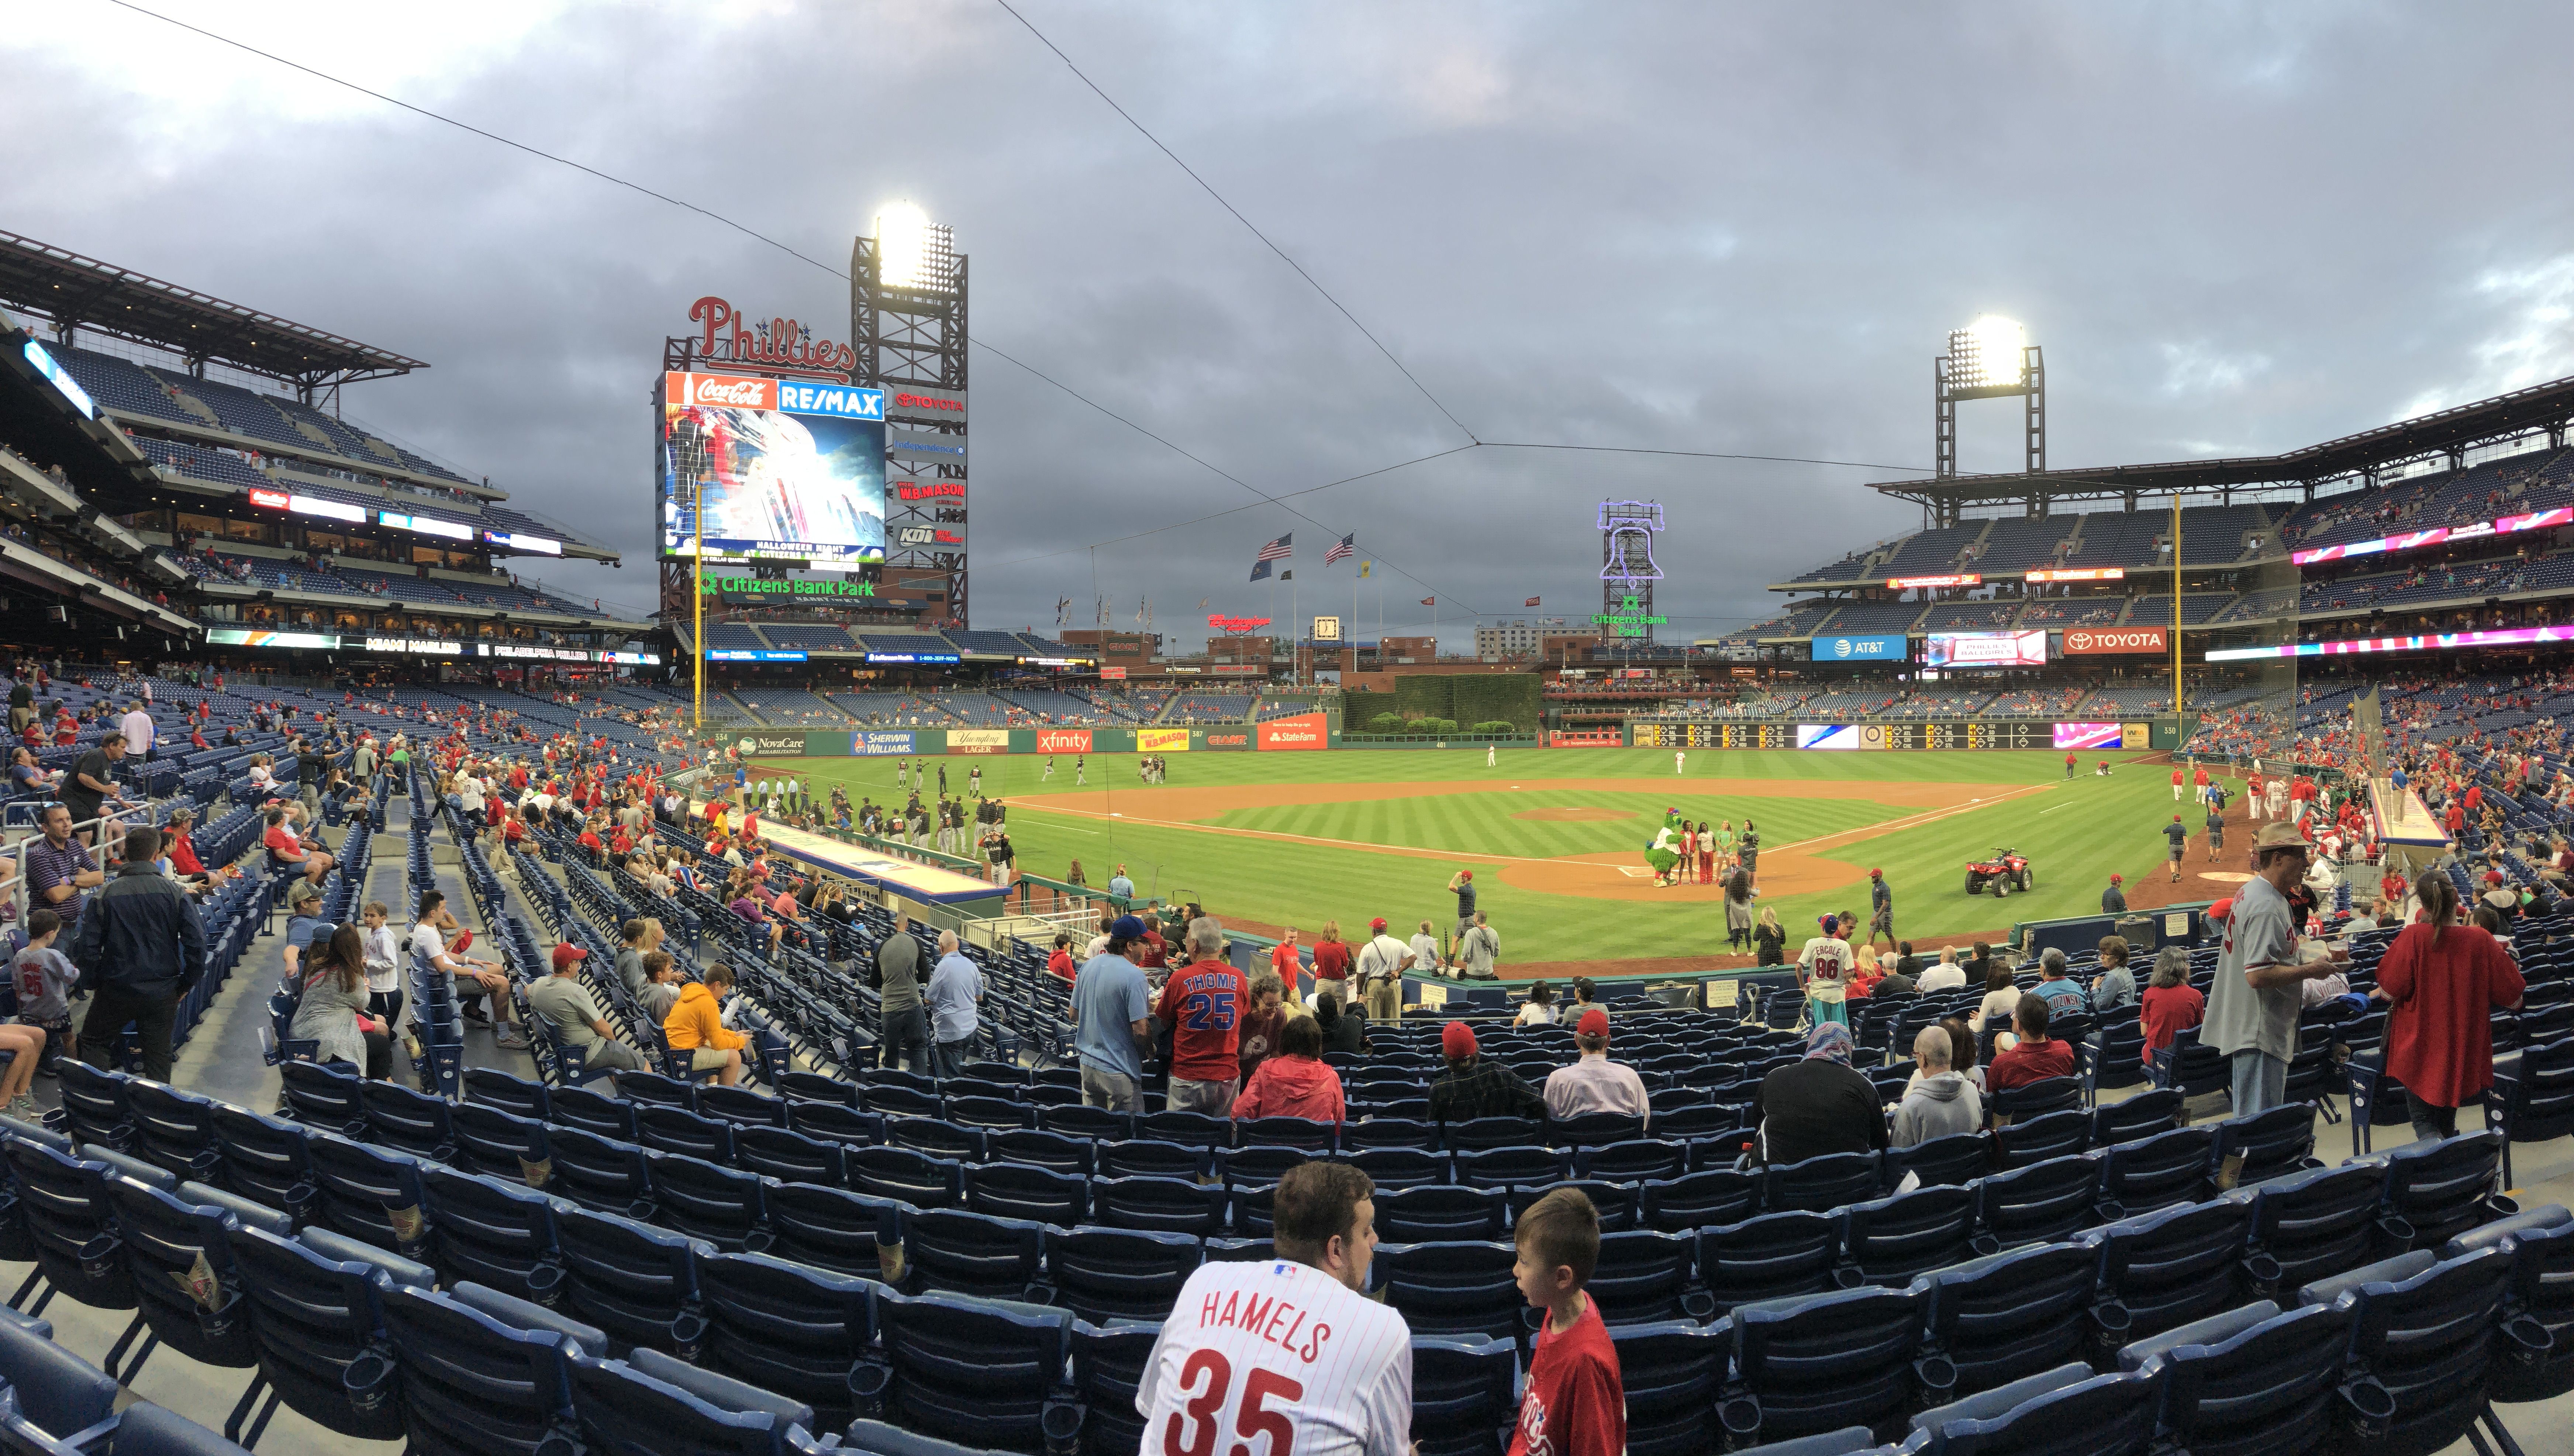 Citizens Bank Park in Philadelphia. Photo by Connor Tustin